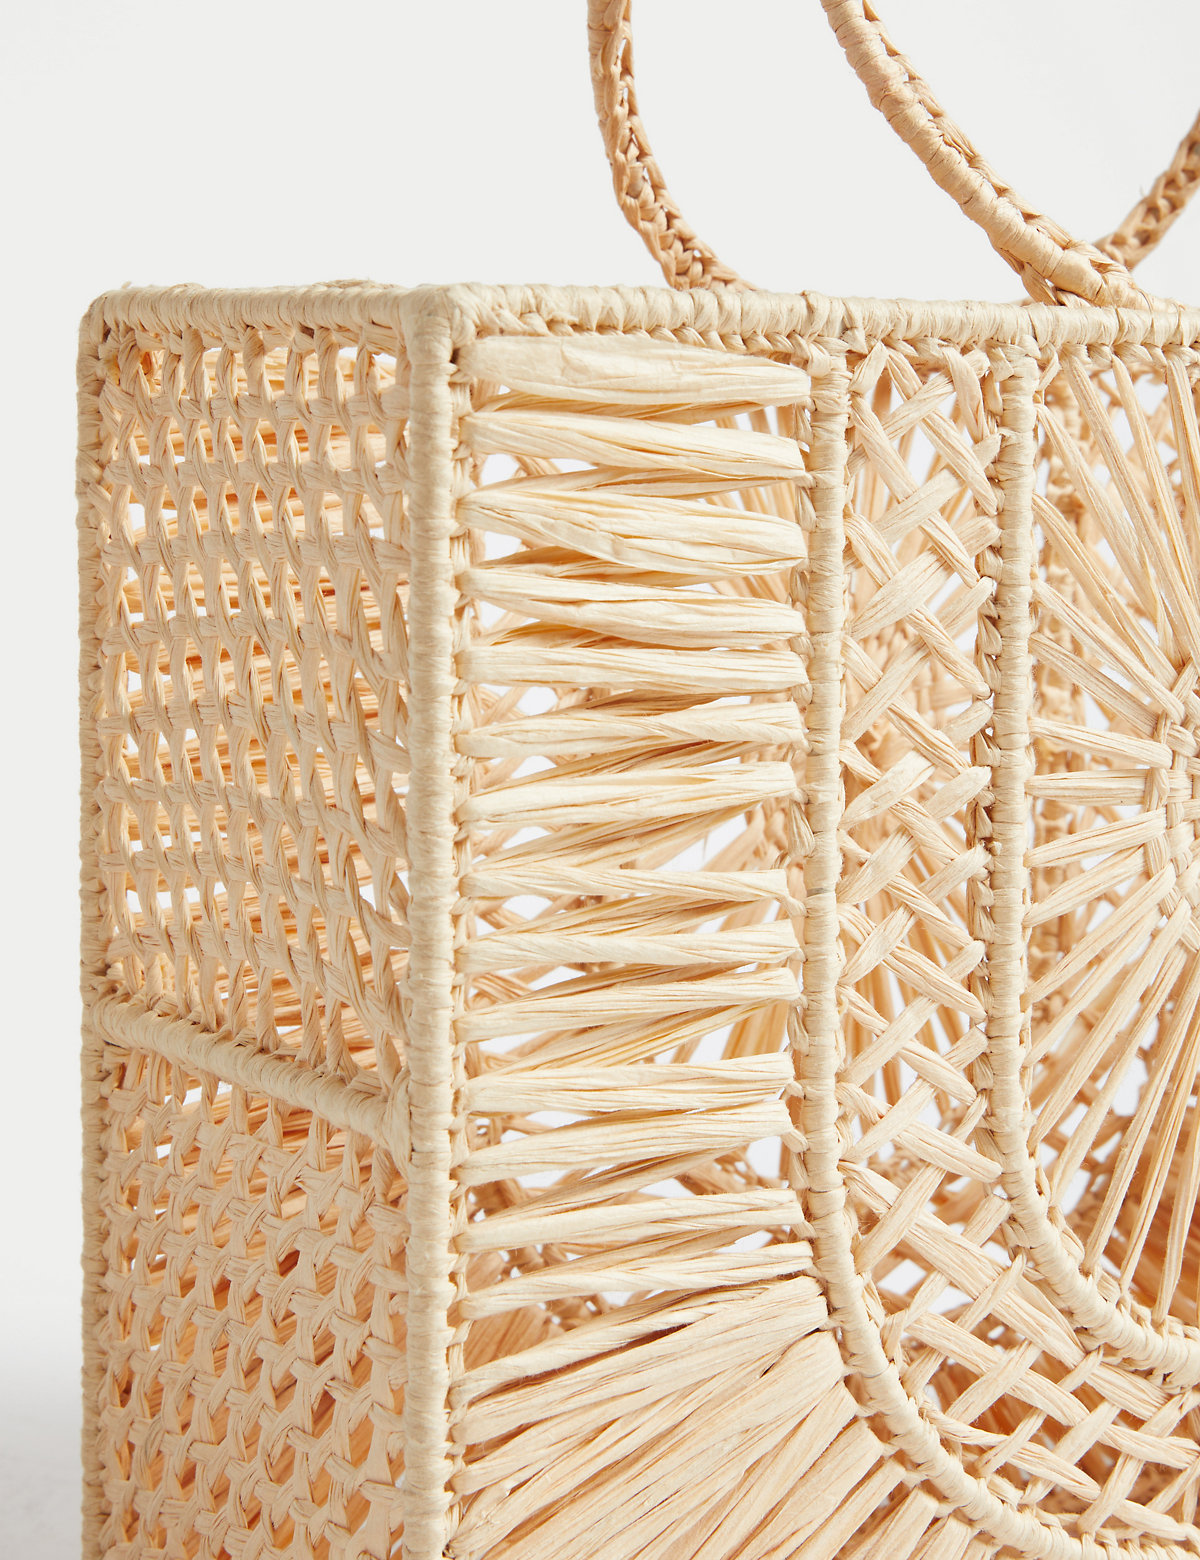 Straw Top Handle Structured Bag